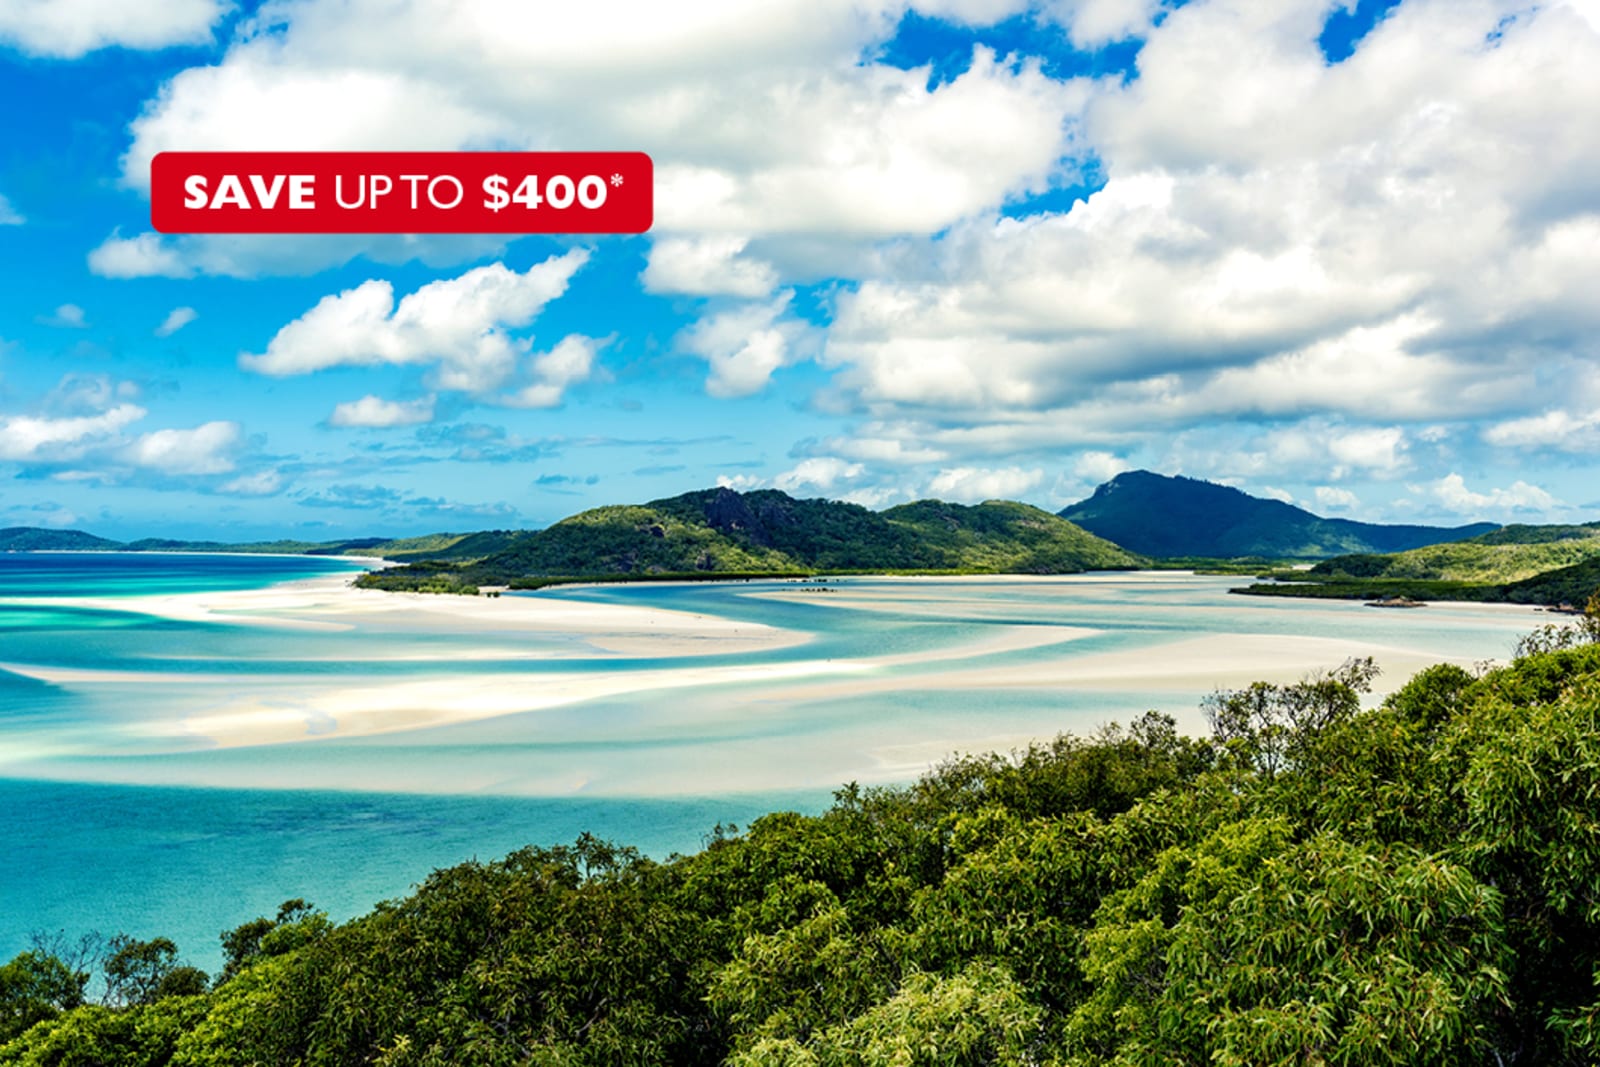 On Royal Caribbean International's Queensland cruise, you can visit the beautiful Whitsunday Islands